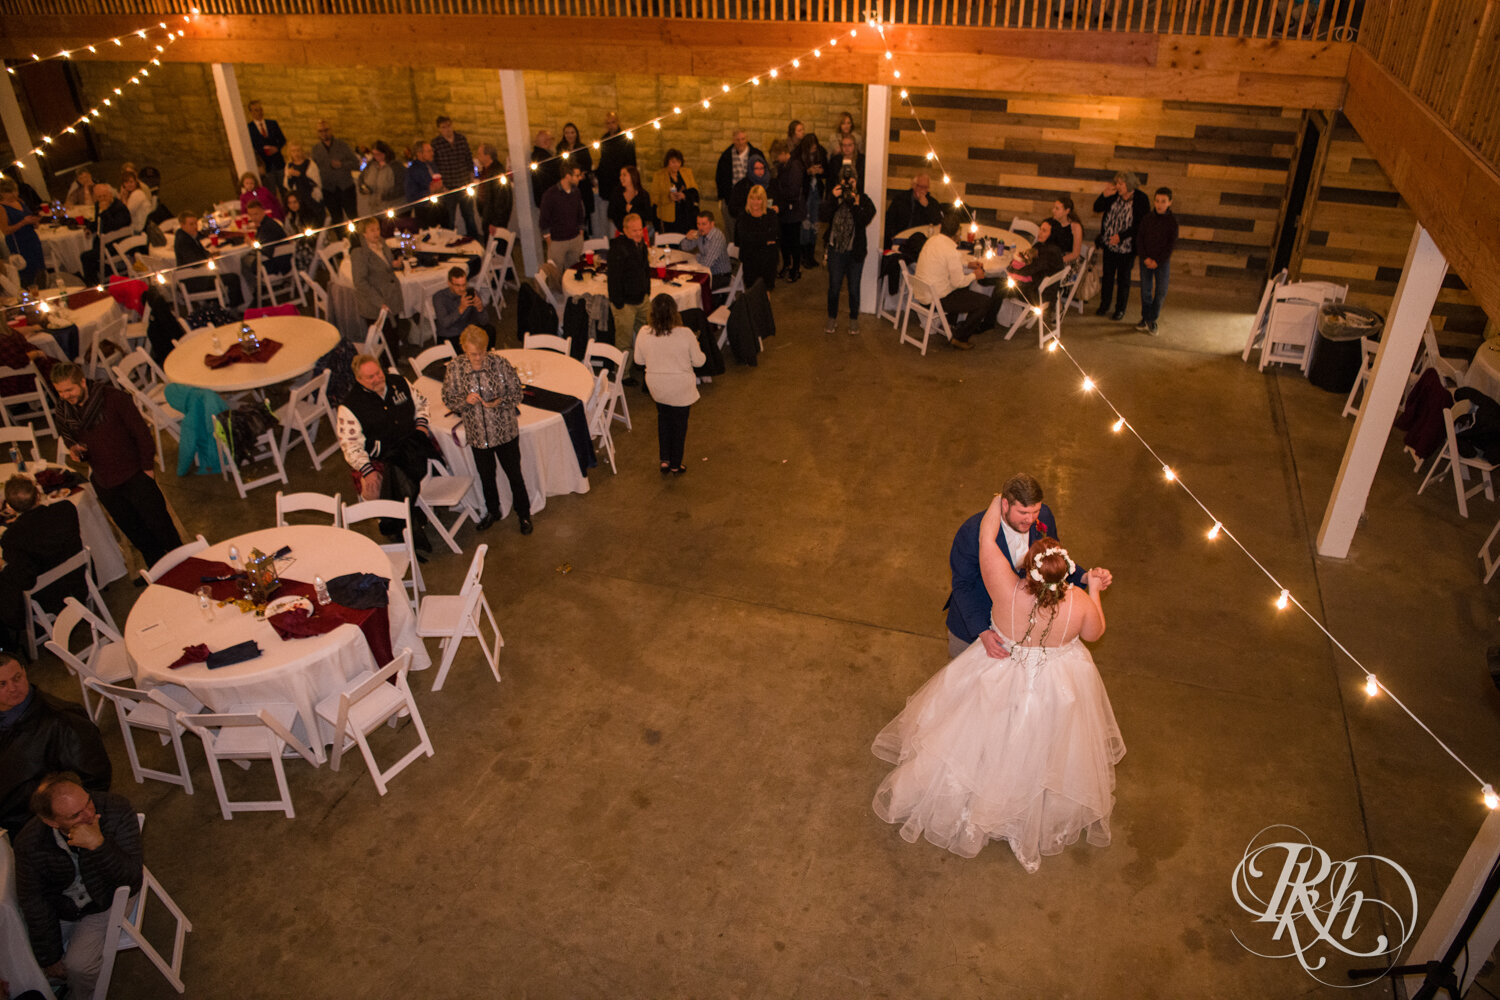 Plus size bride and groom dance at wedding reception at Olmsted County Fairgrounds in Rochester, Minnesota.